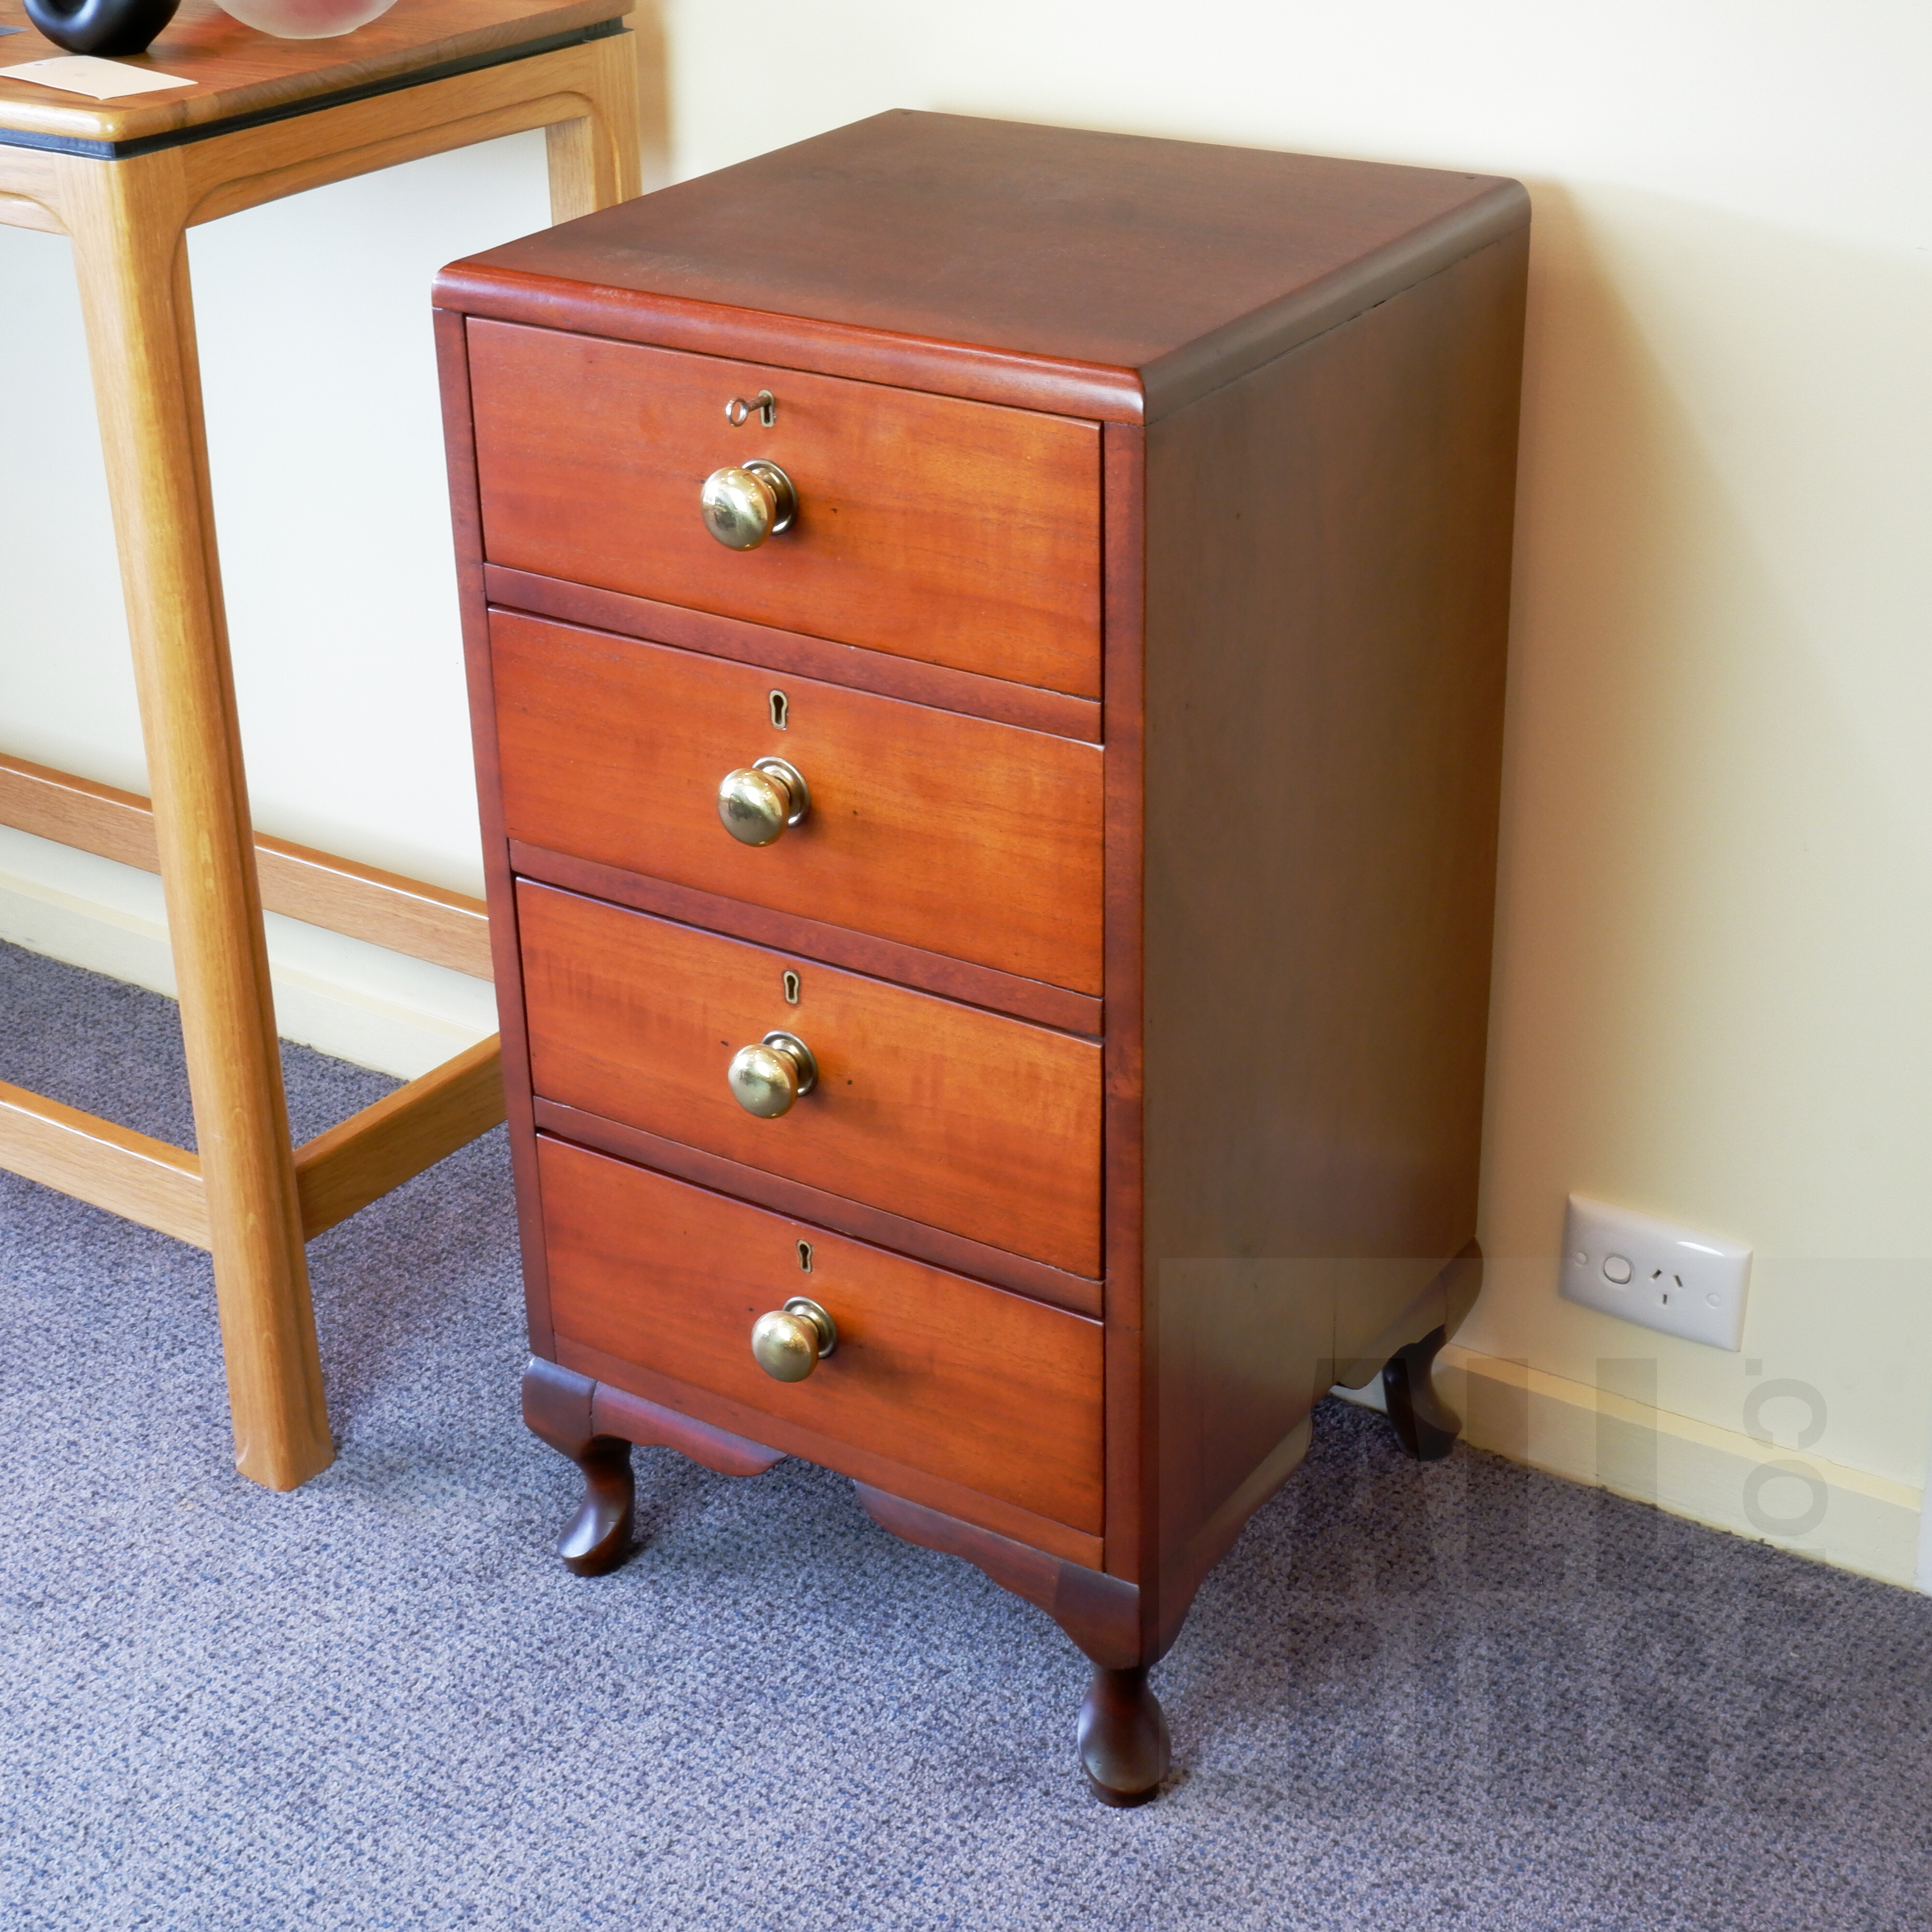 'Early 20th Century Mahogany Bedside Chest of Drawers'